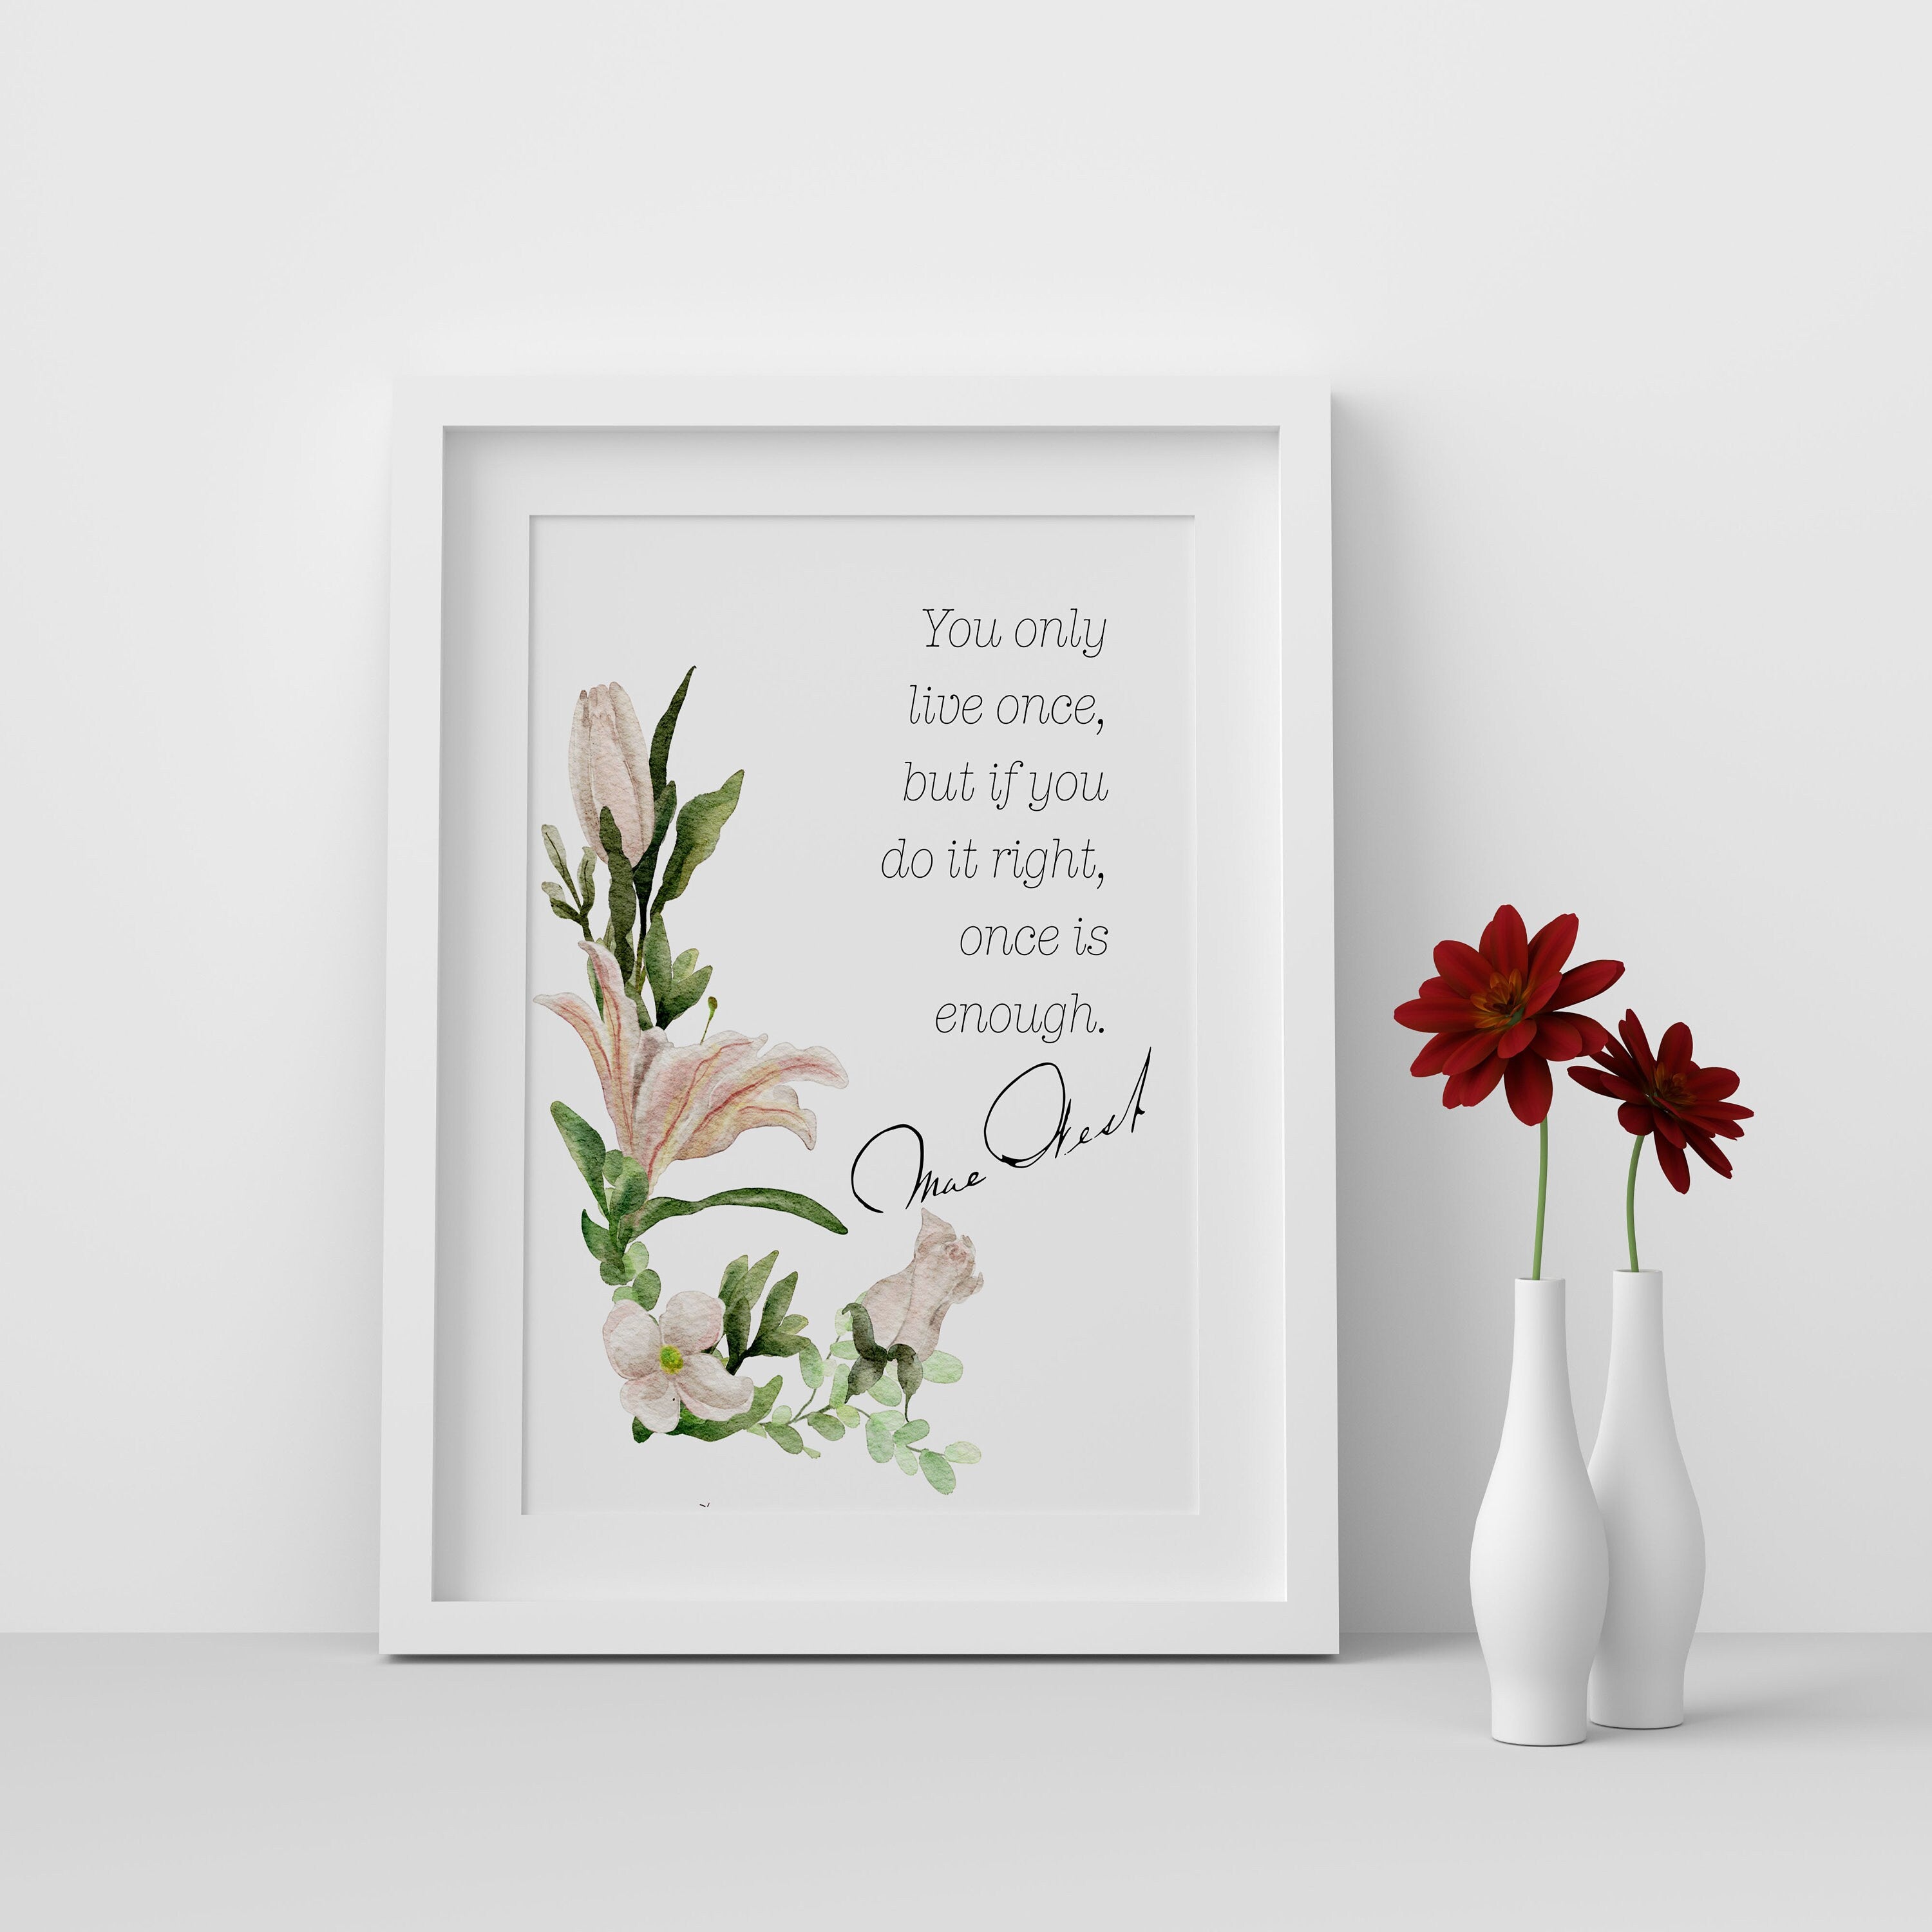 Mae West Quote Art Print - "You only live once, but if you do it right, once is enough", Floral Botanical Print Available Framed or Unframed